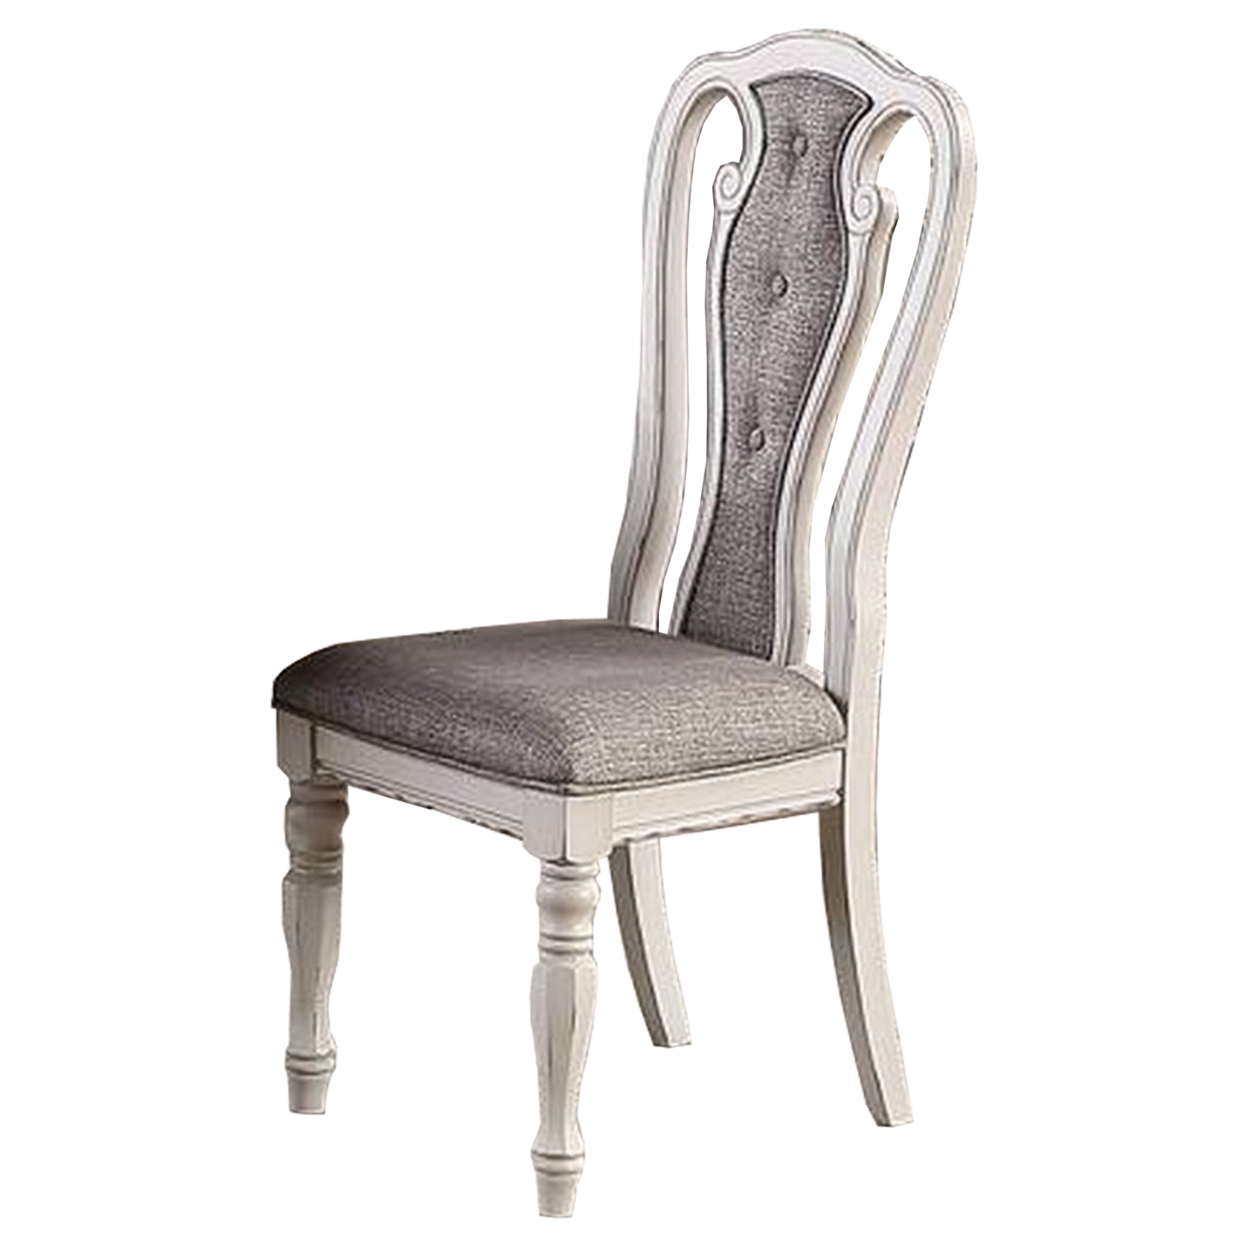 Dining Chair With Button Tufted Backrest And Padded Seat, White And Gray- Saltoro Sherpi